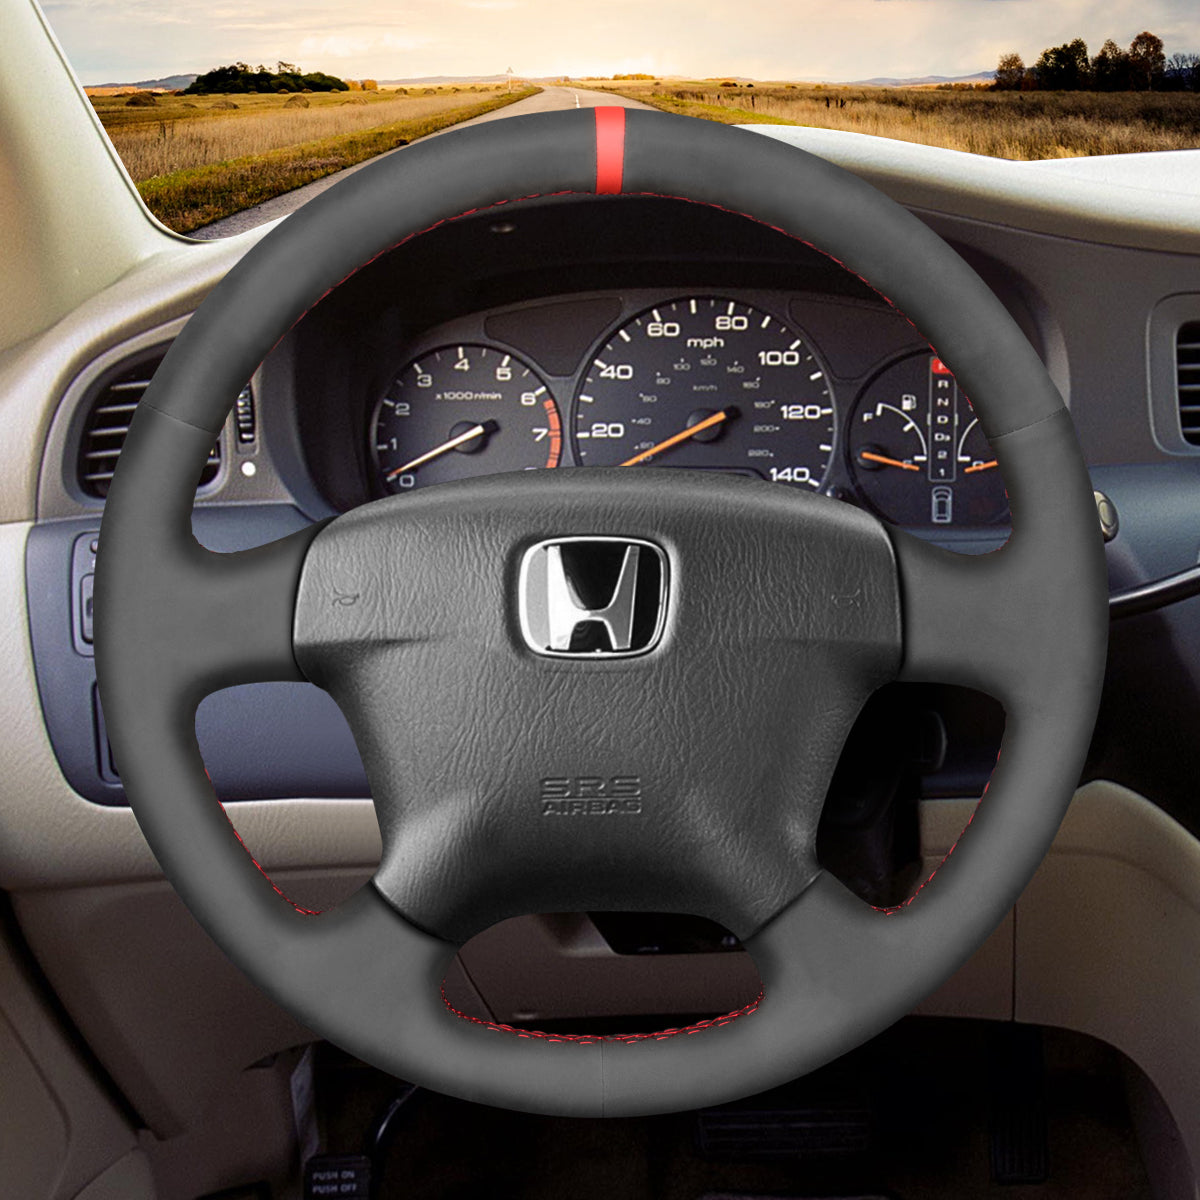 MEWANT Black Suede Car Steering Wheel Cover for Honda Civic 2001-2003 / Odyssey 2002-2004 / Stream 2000-2004